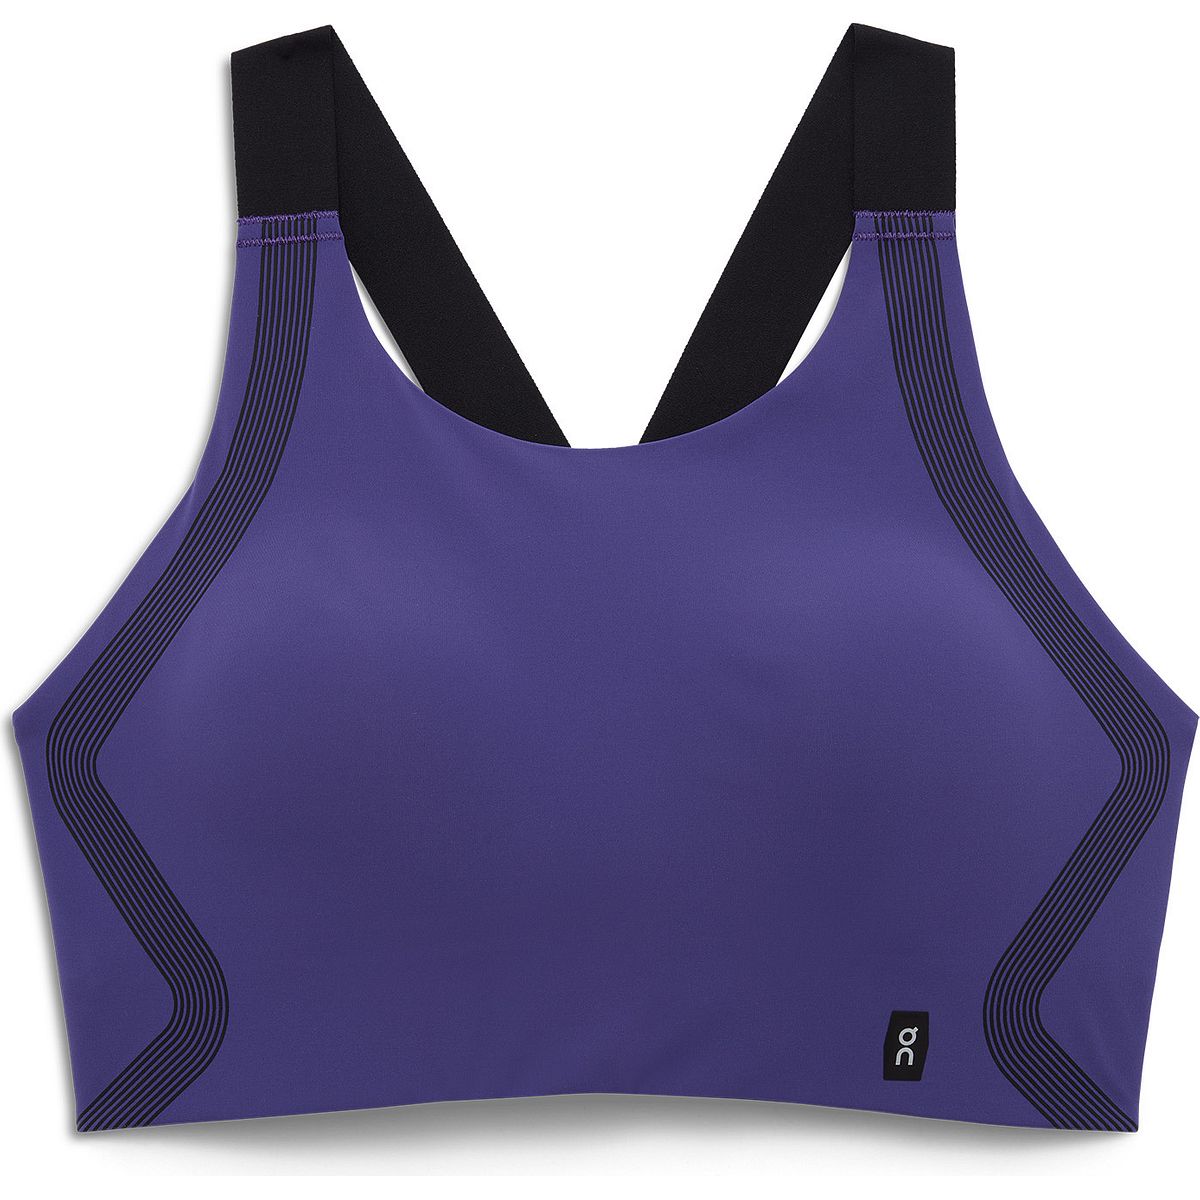 Performance Bra - We're Outside Outdoor Outfitters